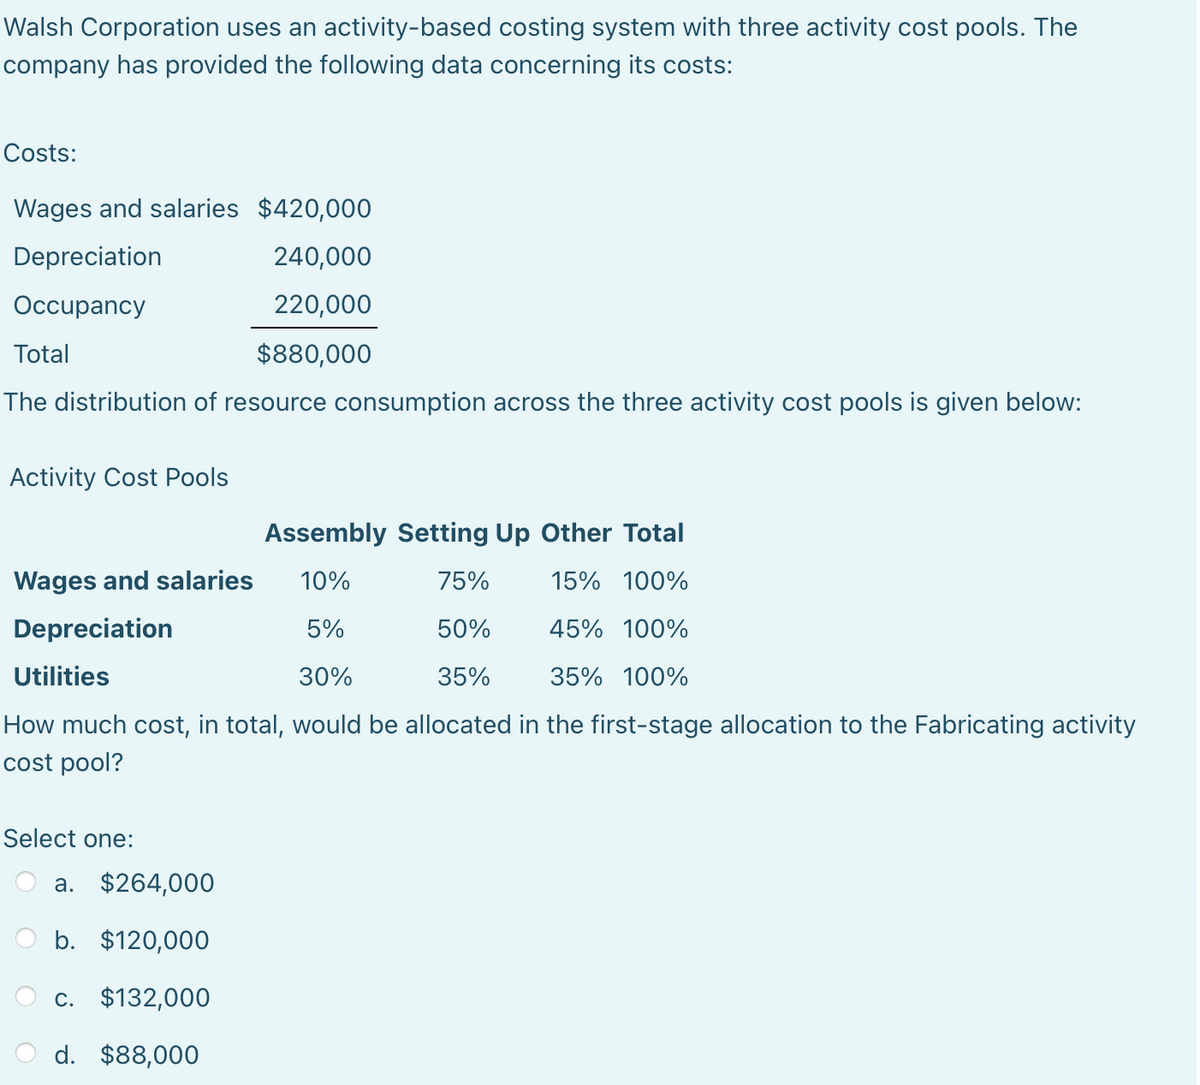 Walsh Corporation uses an activity-based costing system with three activity cost pools. The
company has provided the following data concerning its costs:
Costs:
Wages and salaries $420,000
240,000
220,000
$880,000
Depreciation
Occupancy
Total
The distribution of resource consumption across the three activity cost pools is given below:
Activity Cost Pools
Assembly Setting Up Other Total
10%
75%
15% 100%
5%
50%
45% 100%
30%
35%
35% 100%
How much cost, in total, would be allocated in the first-stage allocation to the Fabricating activity
cost pool?
Wages and salaries
Depreciation
Utilities
Select one:
$264,000
b. $120,000
c. $132,000
d. $88,000
a.